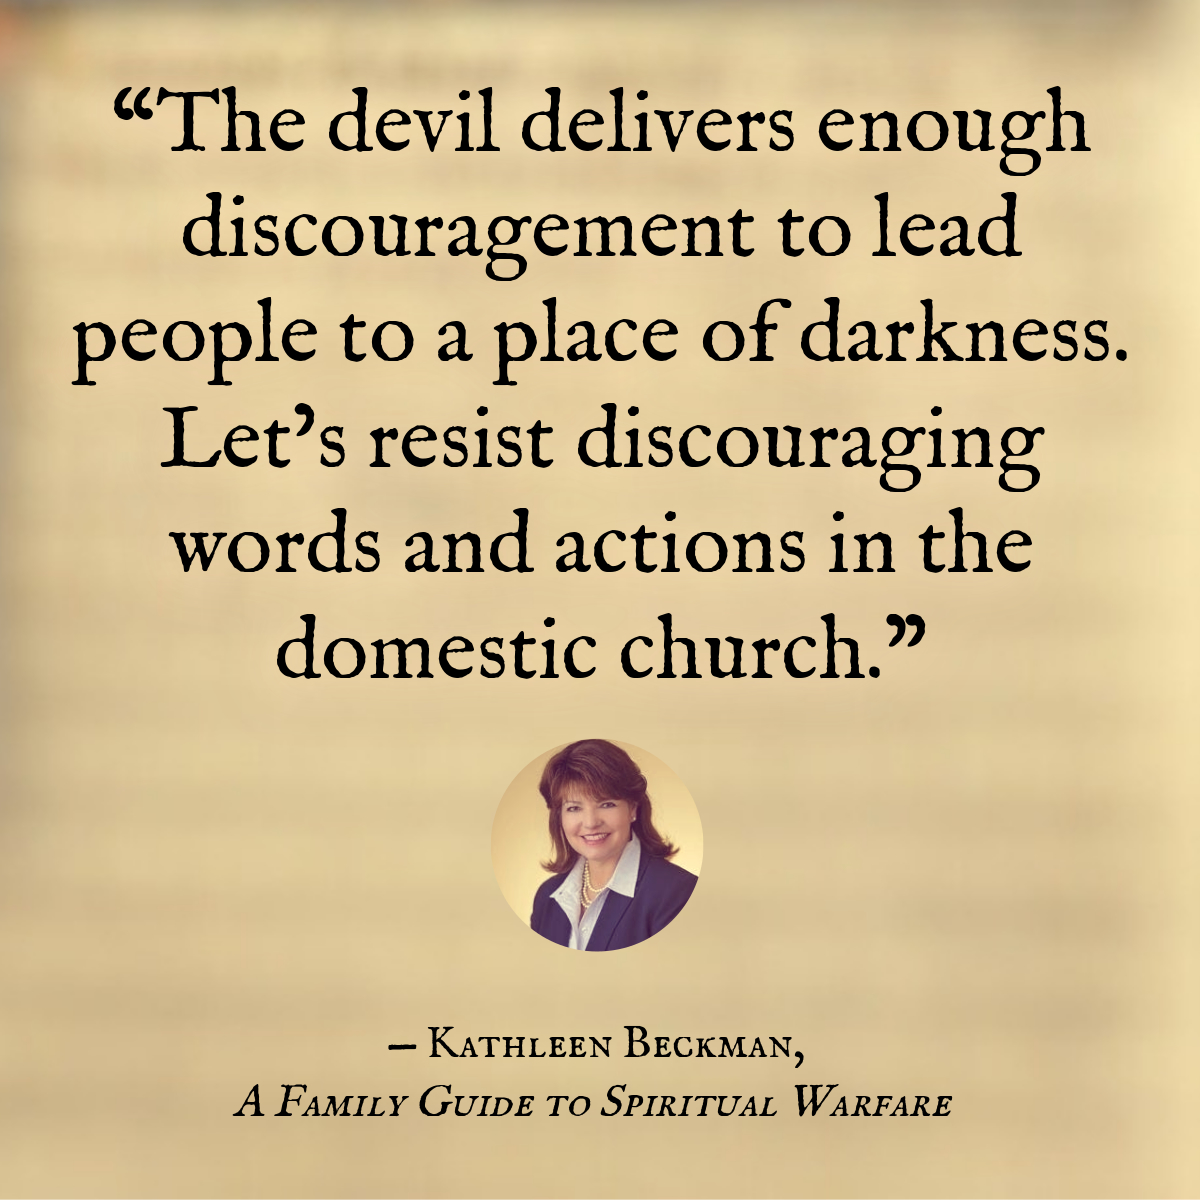 Temptation: The Ordinary Ways the Devil Attacks Us: “The devil delivers enough discour­agement to lead people to a place of darkness. Let’s resist discour­aging words and actions in the domestic church.”